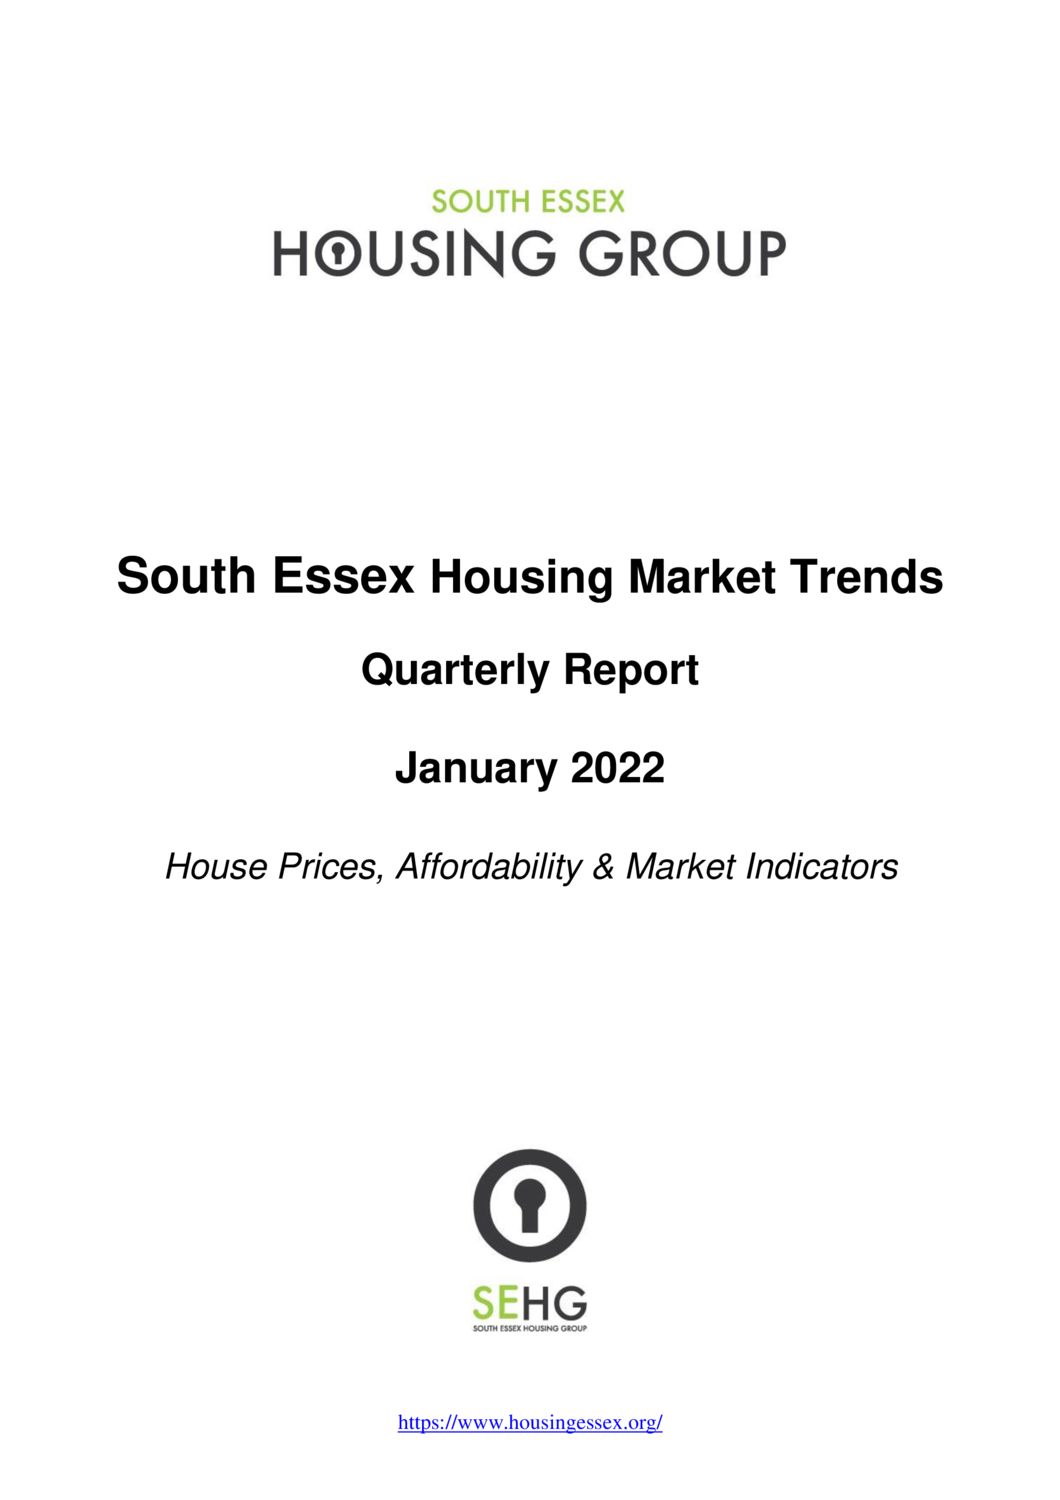 South Essex Housing Market Trends Report January 2022